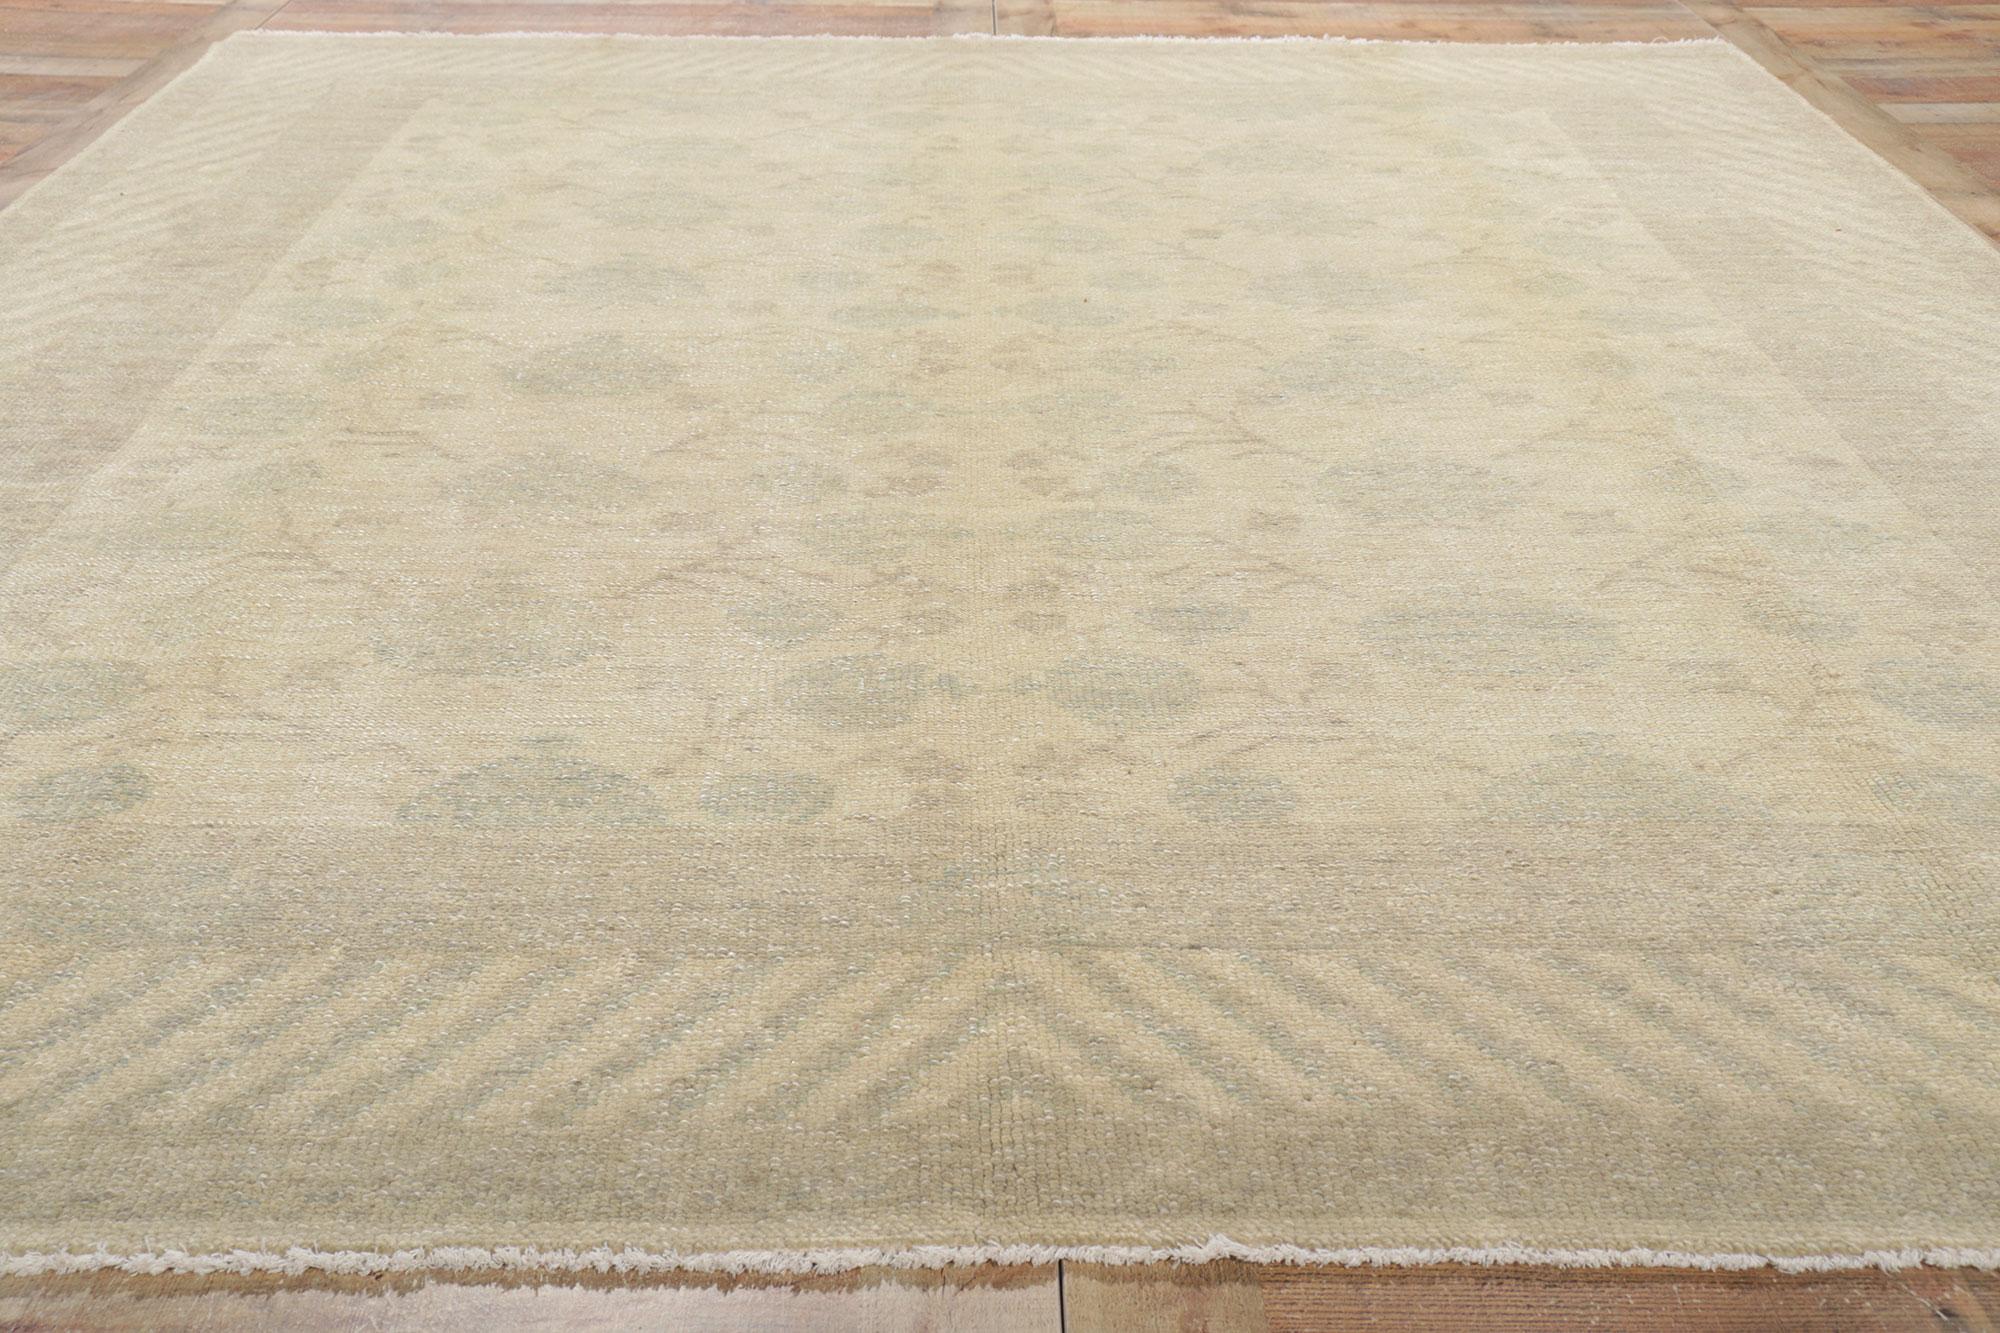 Wool New Transitional Khotan Rug with Soft Earth-Tone Colors For Sale